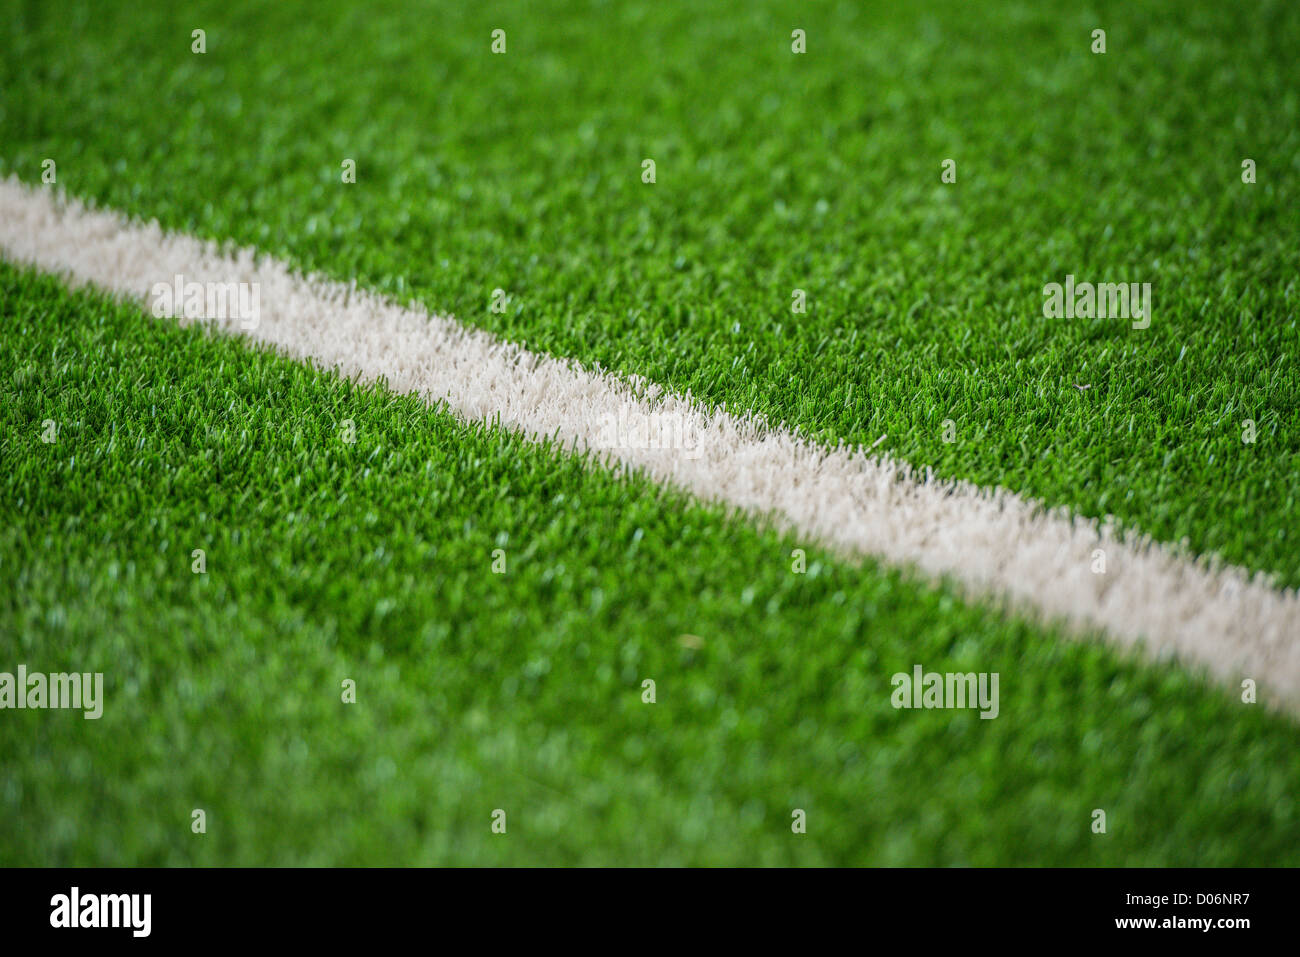 The touch line on a football pitch made of third generation astro turf. Stock Photo